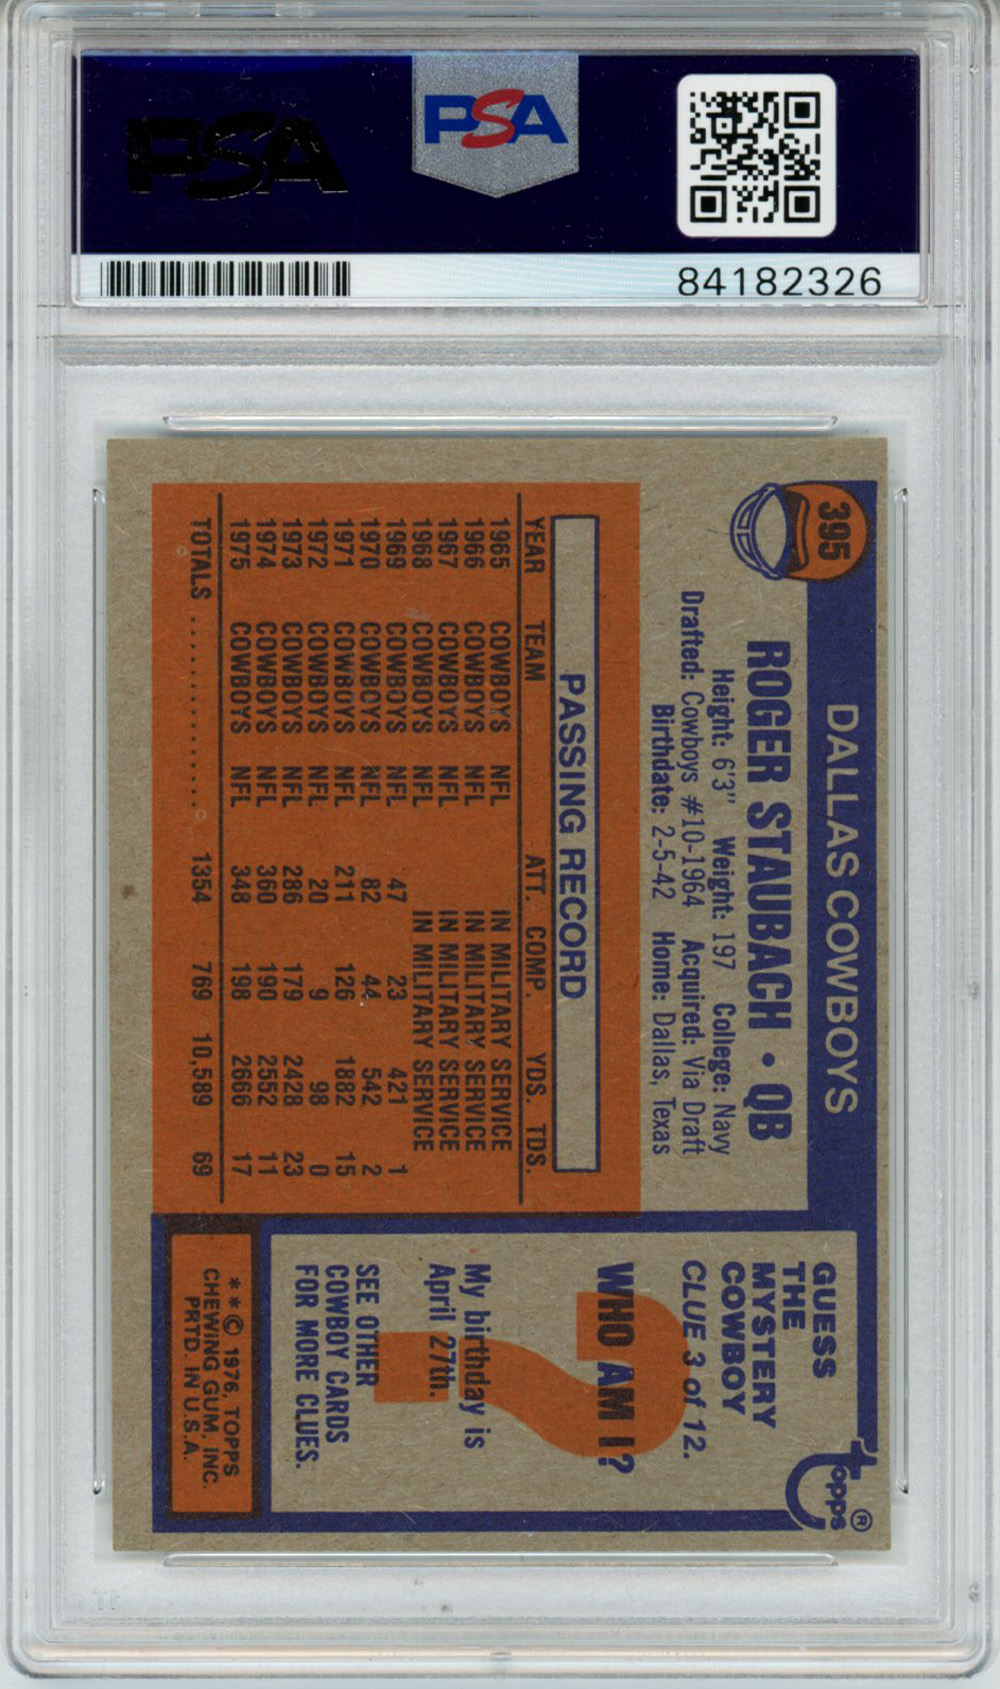 Roger Staubach Autographed 1976 Topps #395 Trading Card PSA Slab